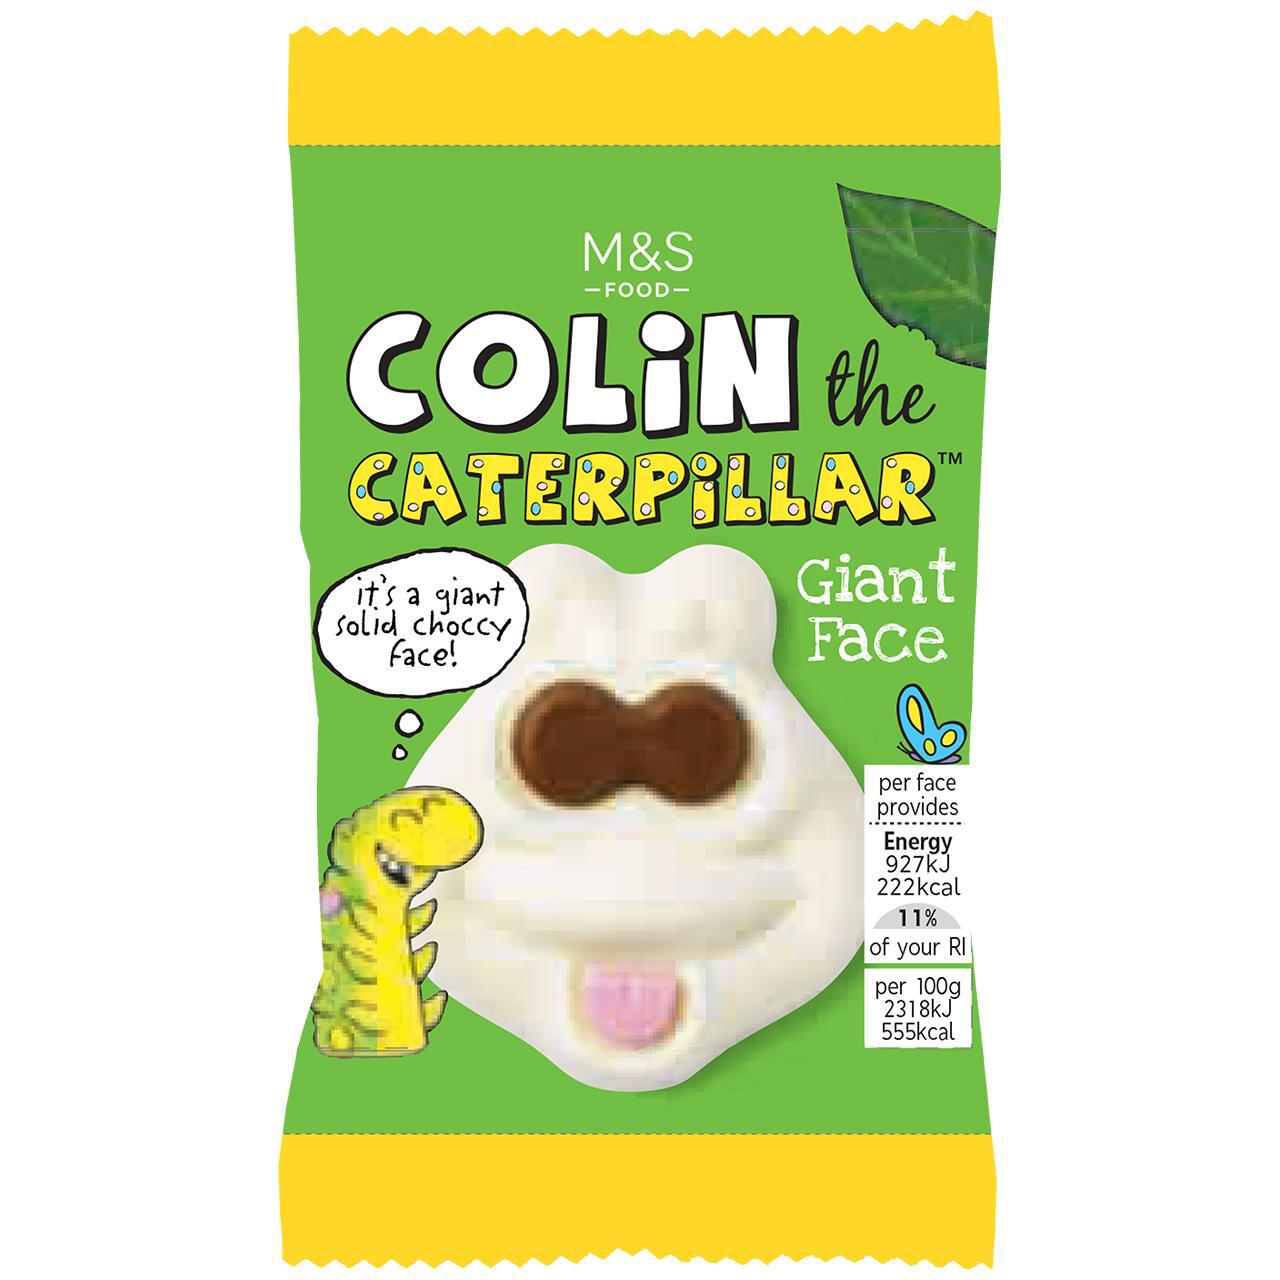 M&S Colin the Caterpillar Giant Chocolate Face 40g